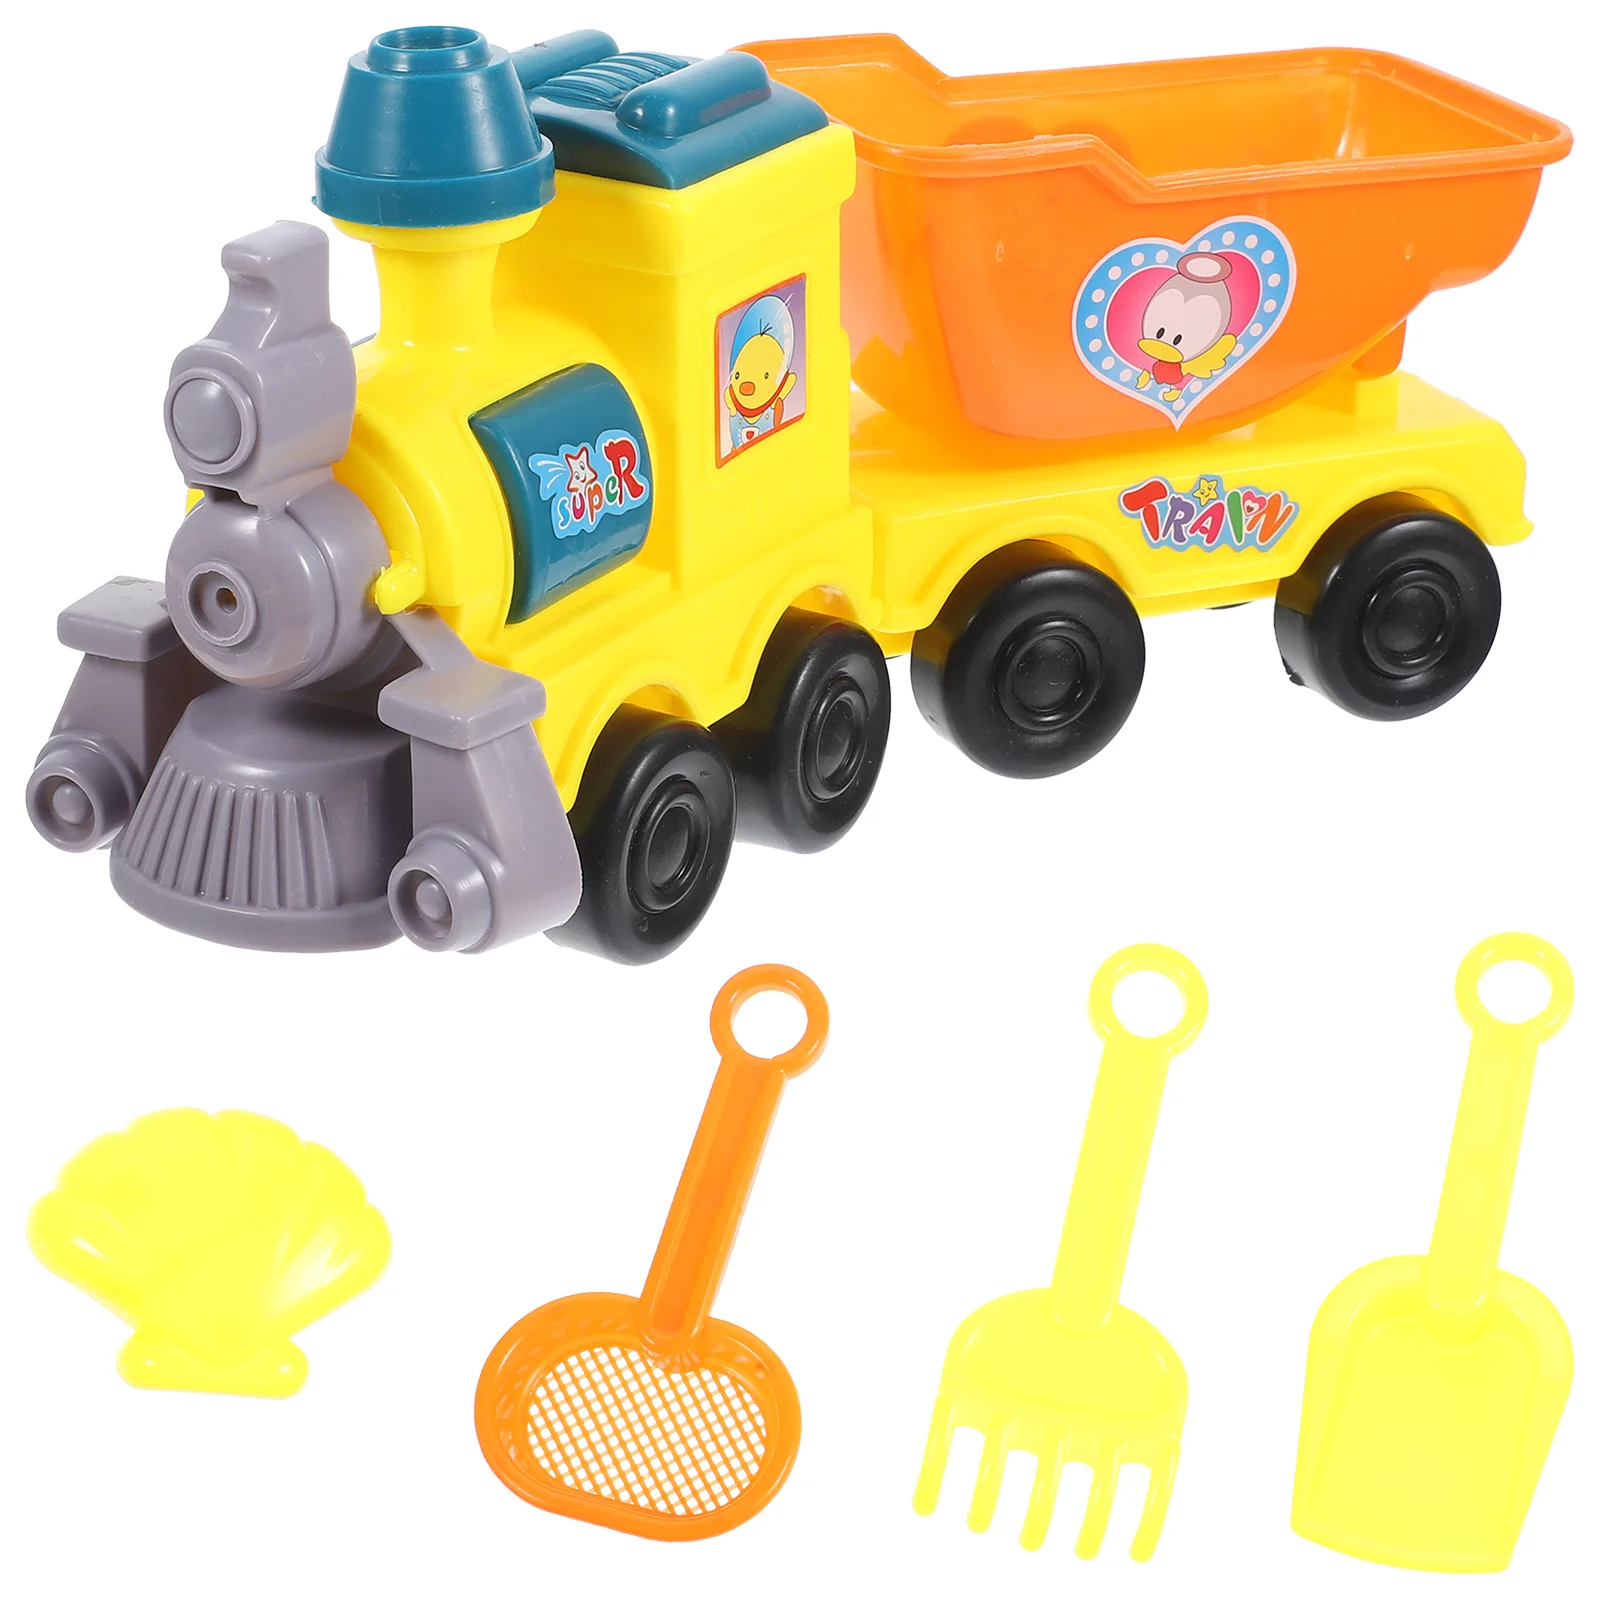 

Beach Train Toy Summer Playthings Water Playing Toys Toddlers Kids Sand Tools Sandbox